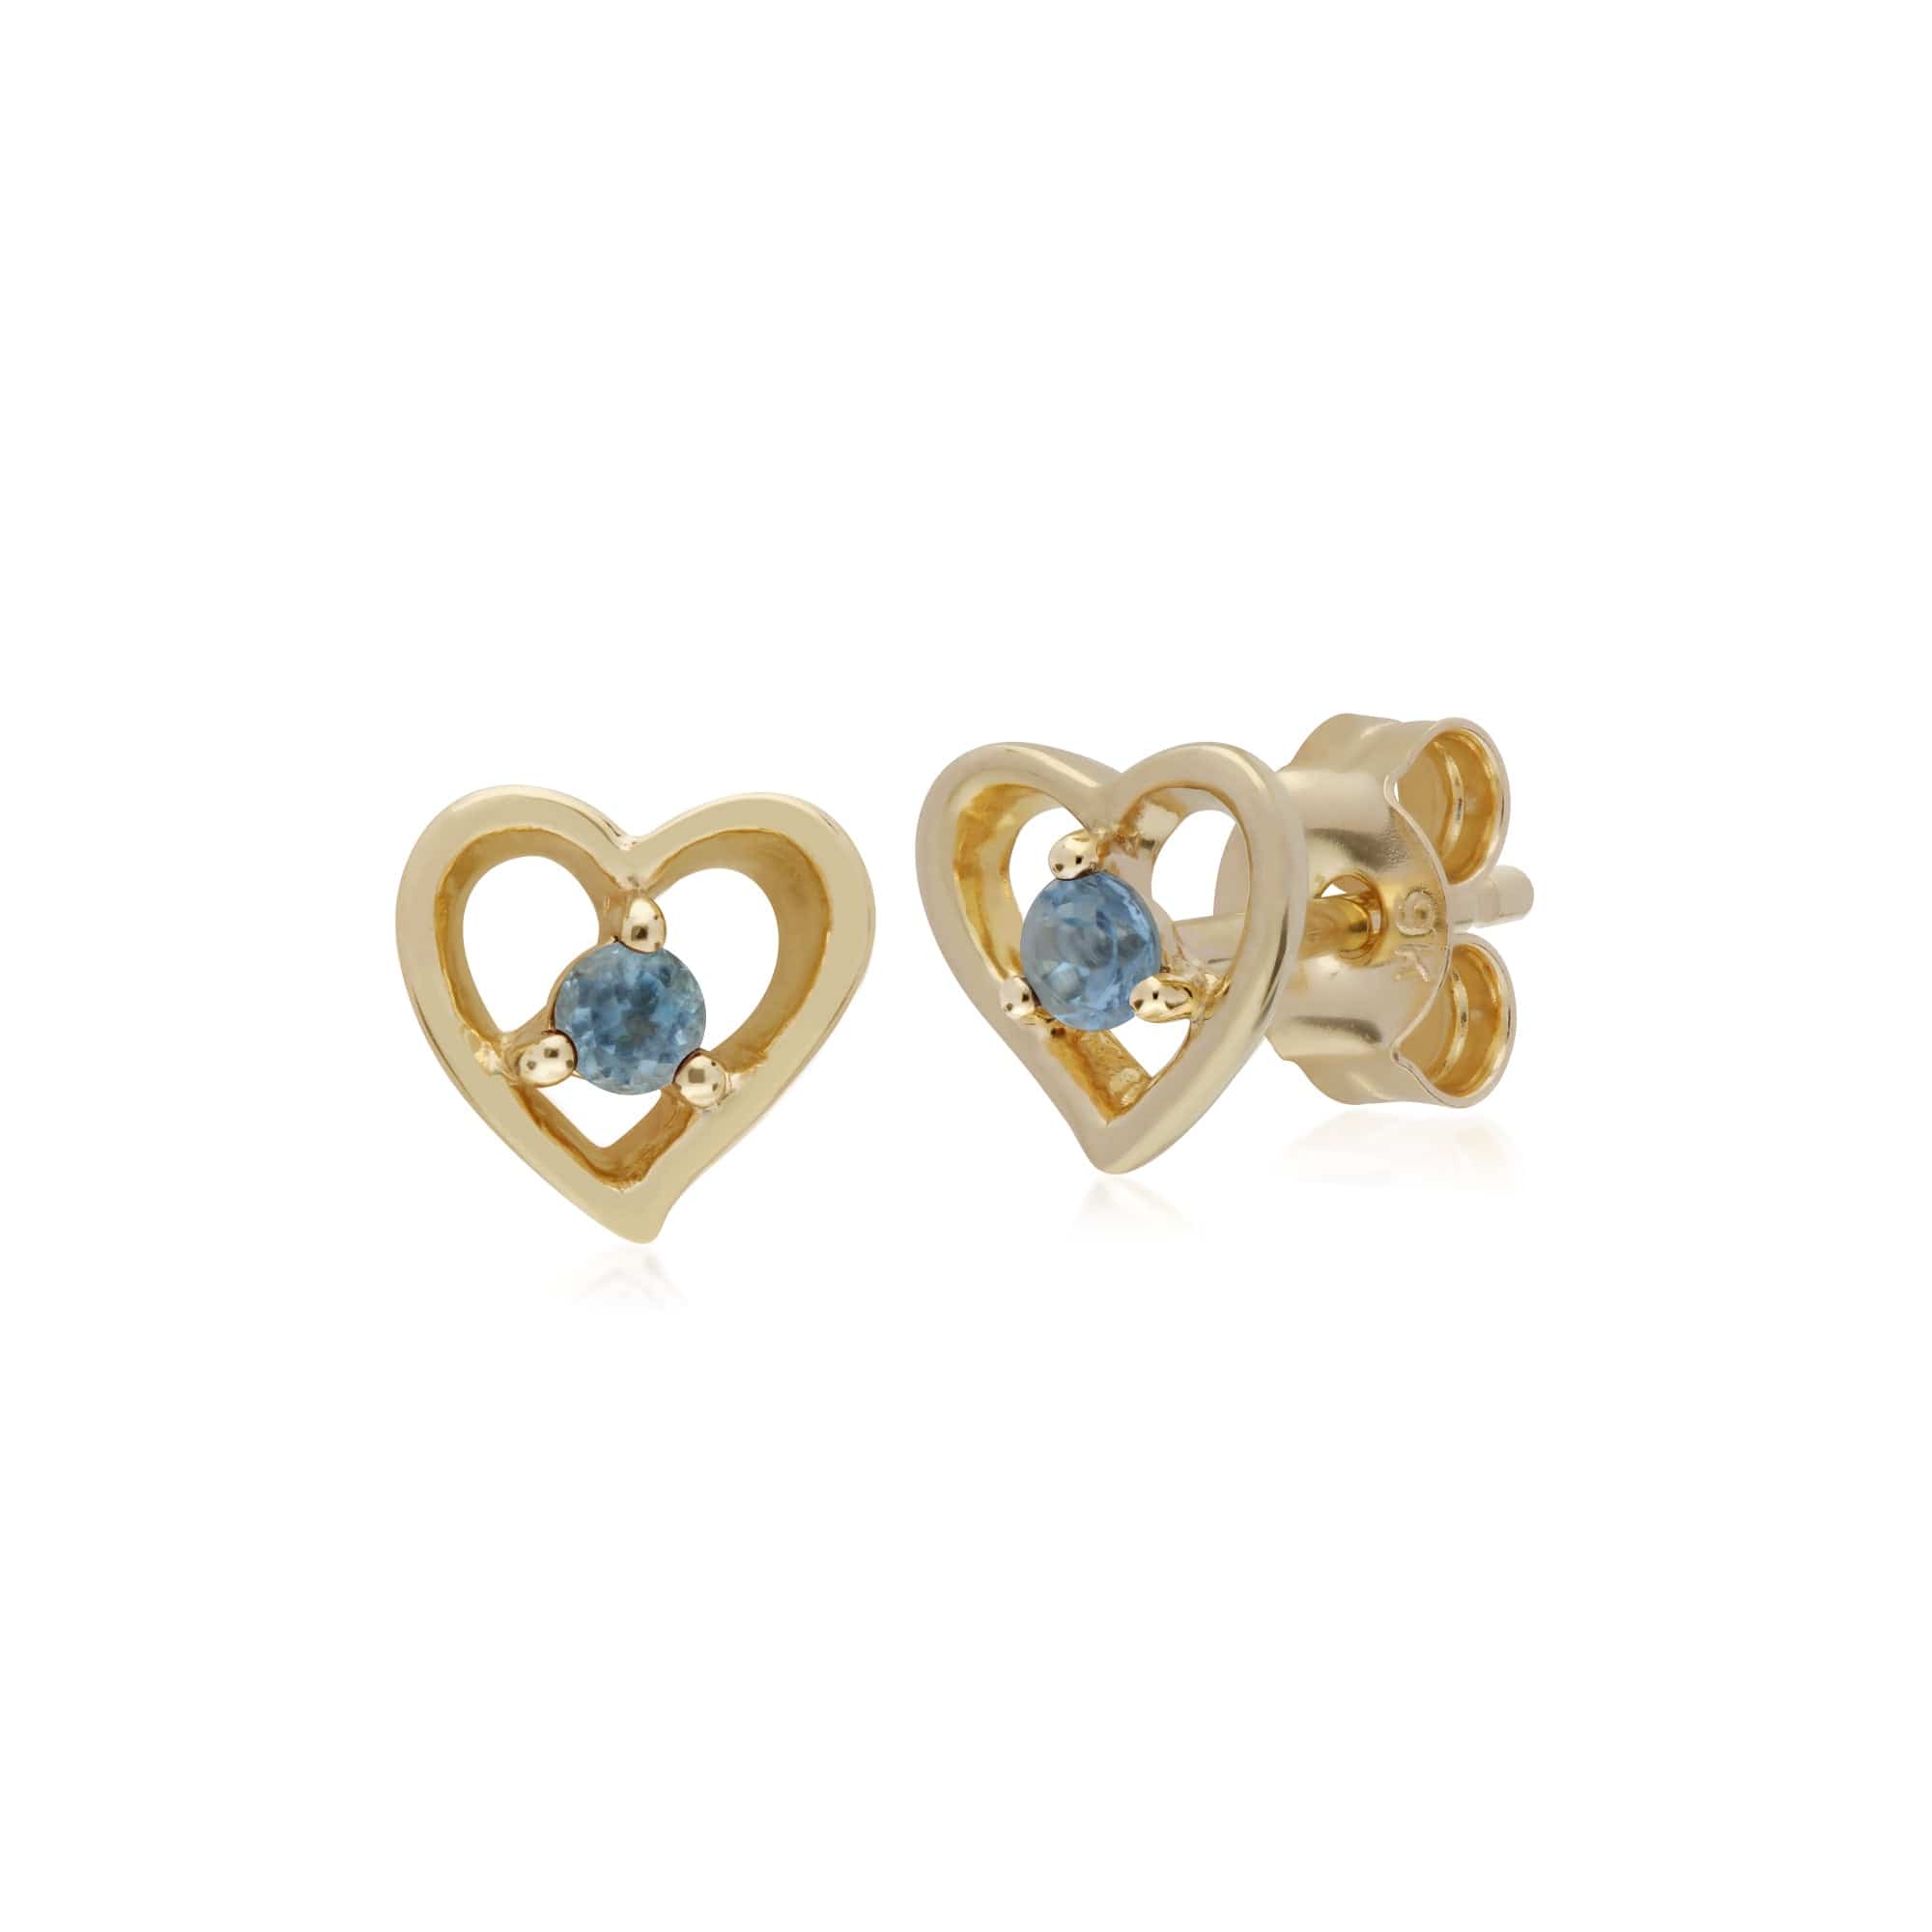 135E1521049-135P1875039 Classic Round Blue Topaz Single Stone Heart Stud Earrings & Necklace Set in 9ct Yellow Gold 2